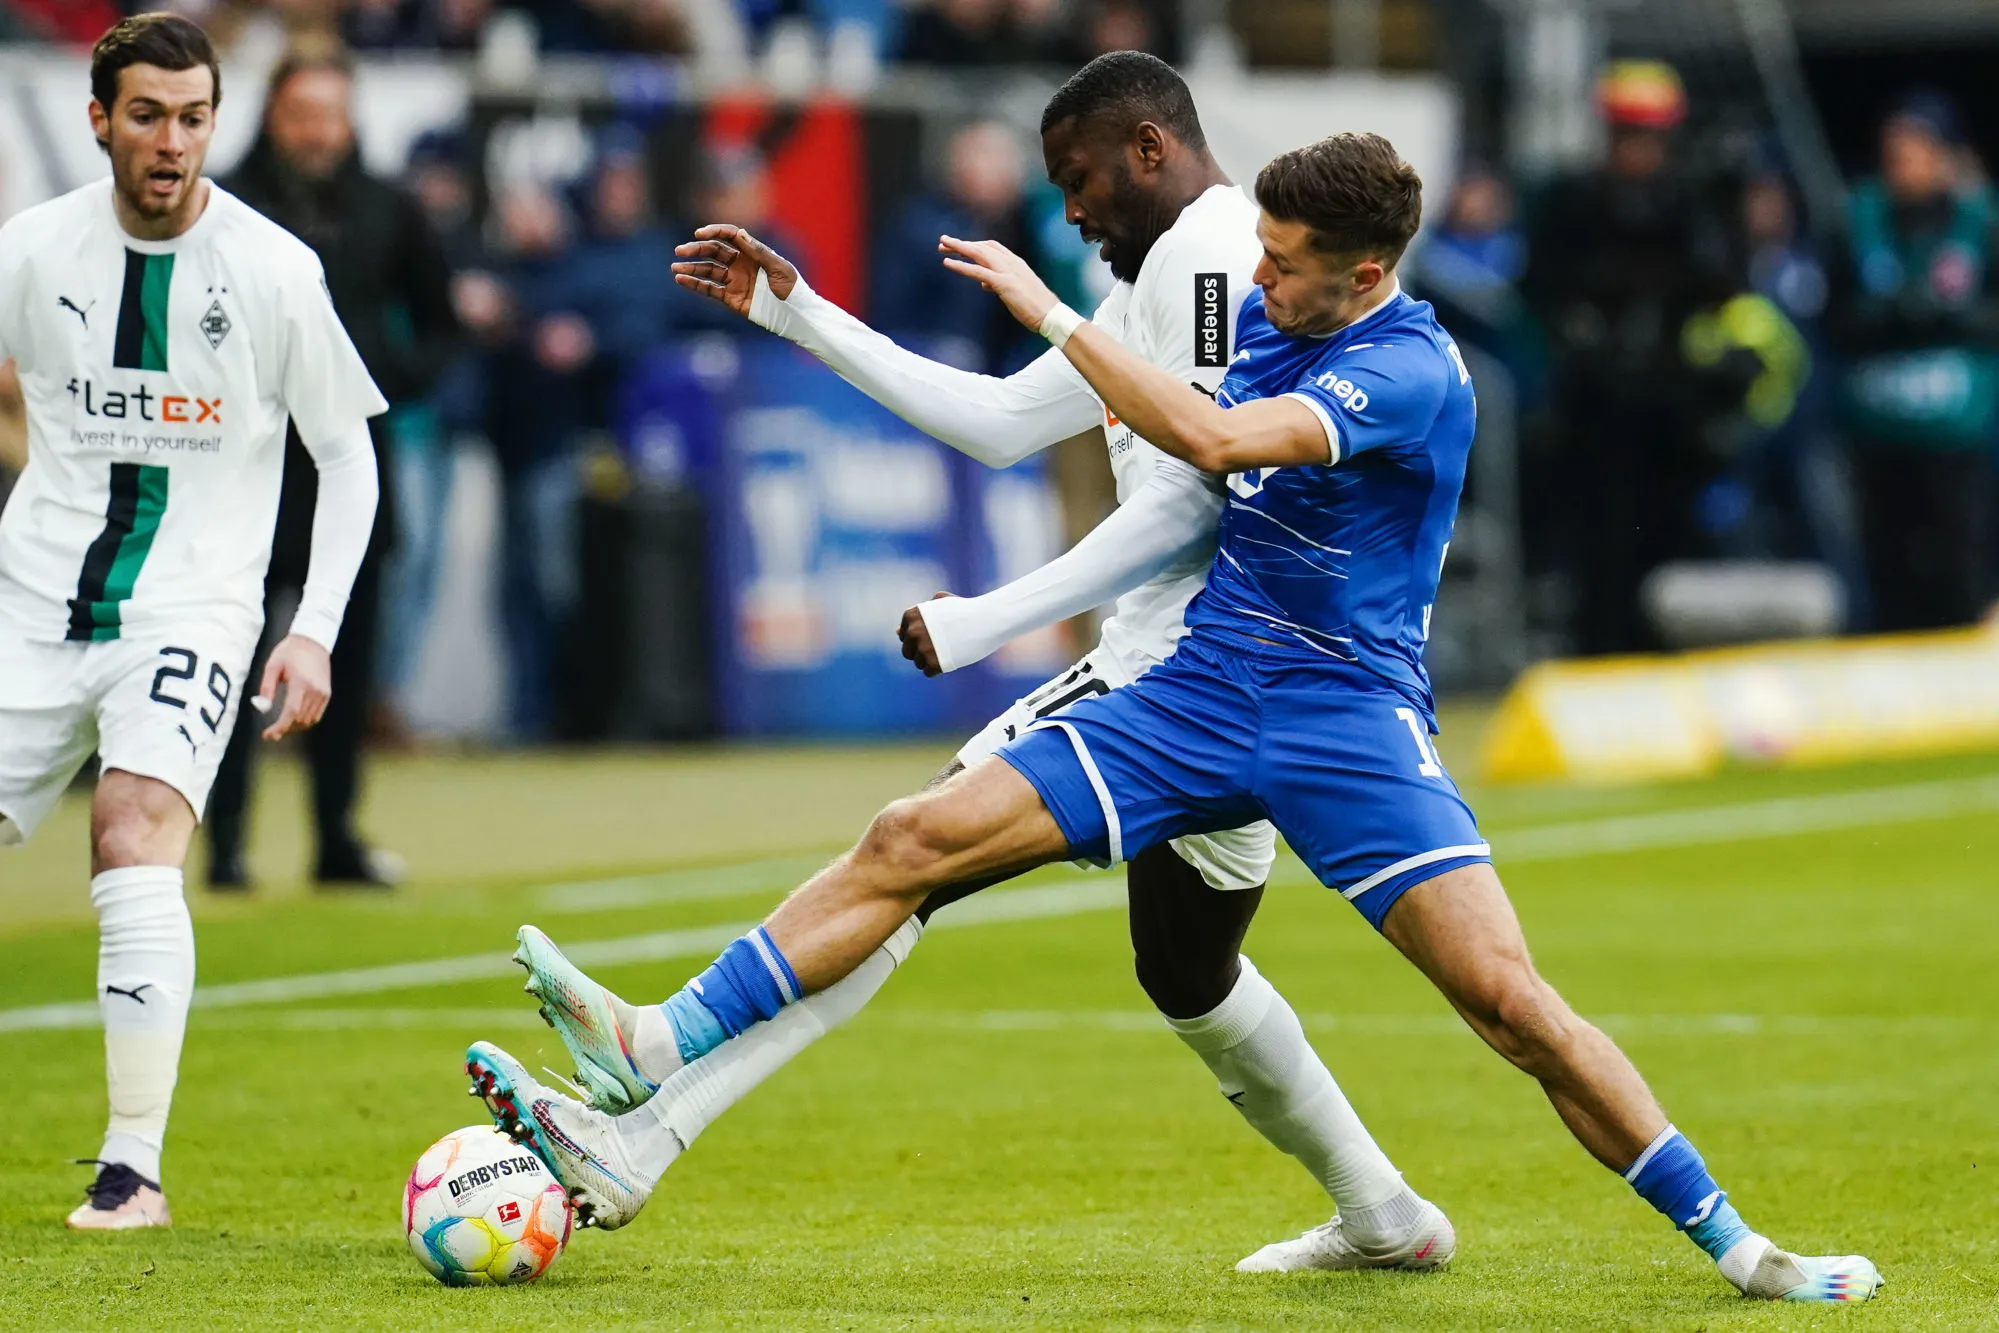 28 January 2023, Baden-Württemberg, Sinsheim: Soccer: Bundesliga, TSG 1899 Hoffenheim - Borussia Mönchengladbach, Matchday 18, PreZero Arena. Gladbach's Marcus Thuram (l) and Hoffenheim's Christoph Baumgartner fight for the ball. Photo: Uwe Anspach/dpa - IMPORTANT NOTE: In accordance with the requirements of the DFL Deutsche Fußball Liga and the DFB Deutscher Fußball-Bund, it is prohibited to use or have used photographs taken in the stadium and/or of the match in the form of sequence pictures and/or video-like photo series. - Photo by Icon sport